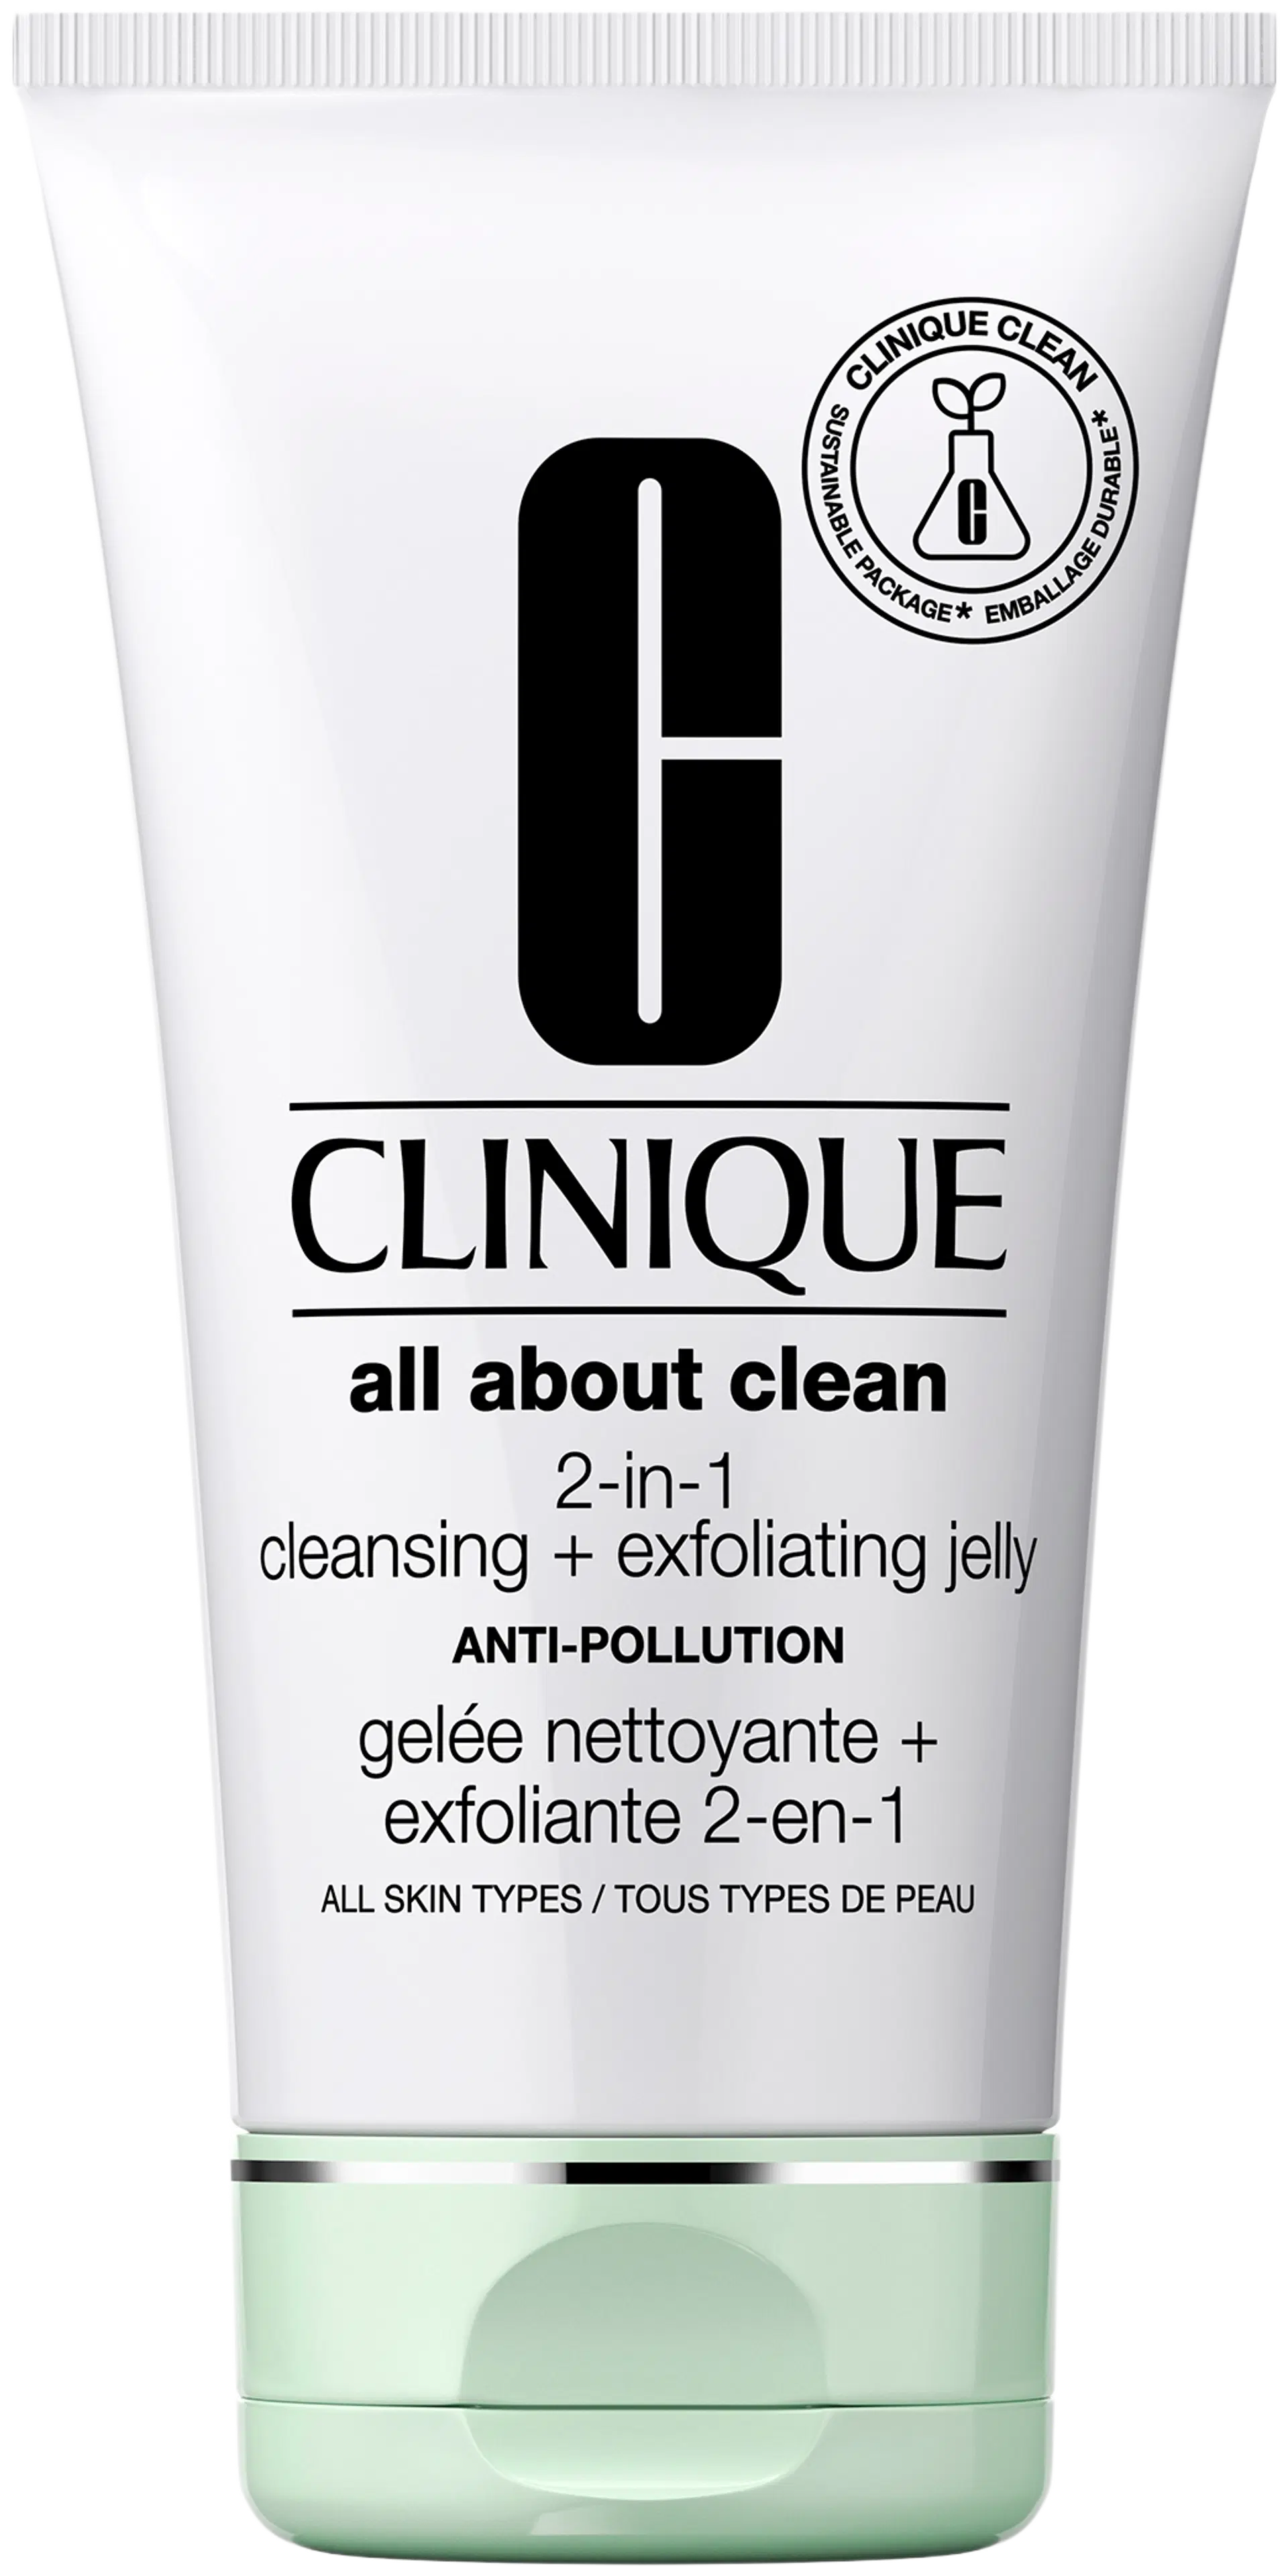 Clinique All About Clean 2-in-1 Detoxifying Jelly Cleanser + Exfoliator Anti-Pollution puhdistusaine 150 ml